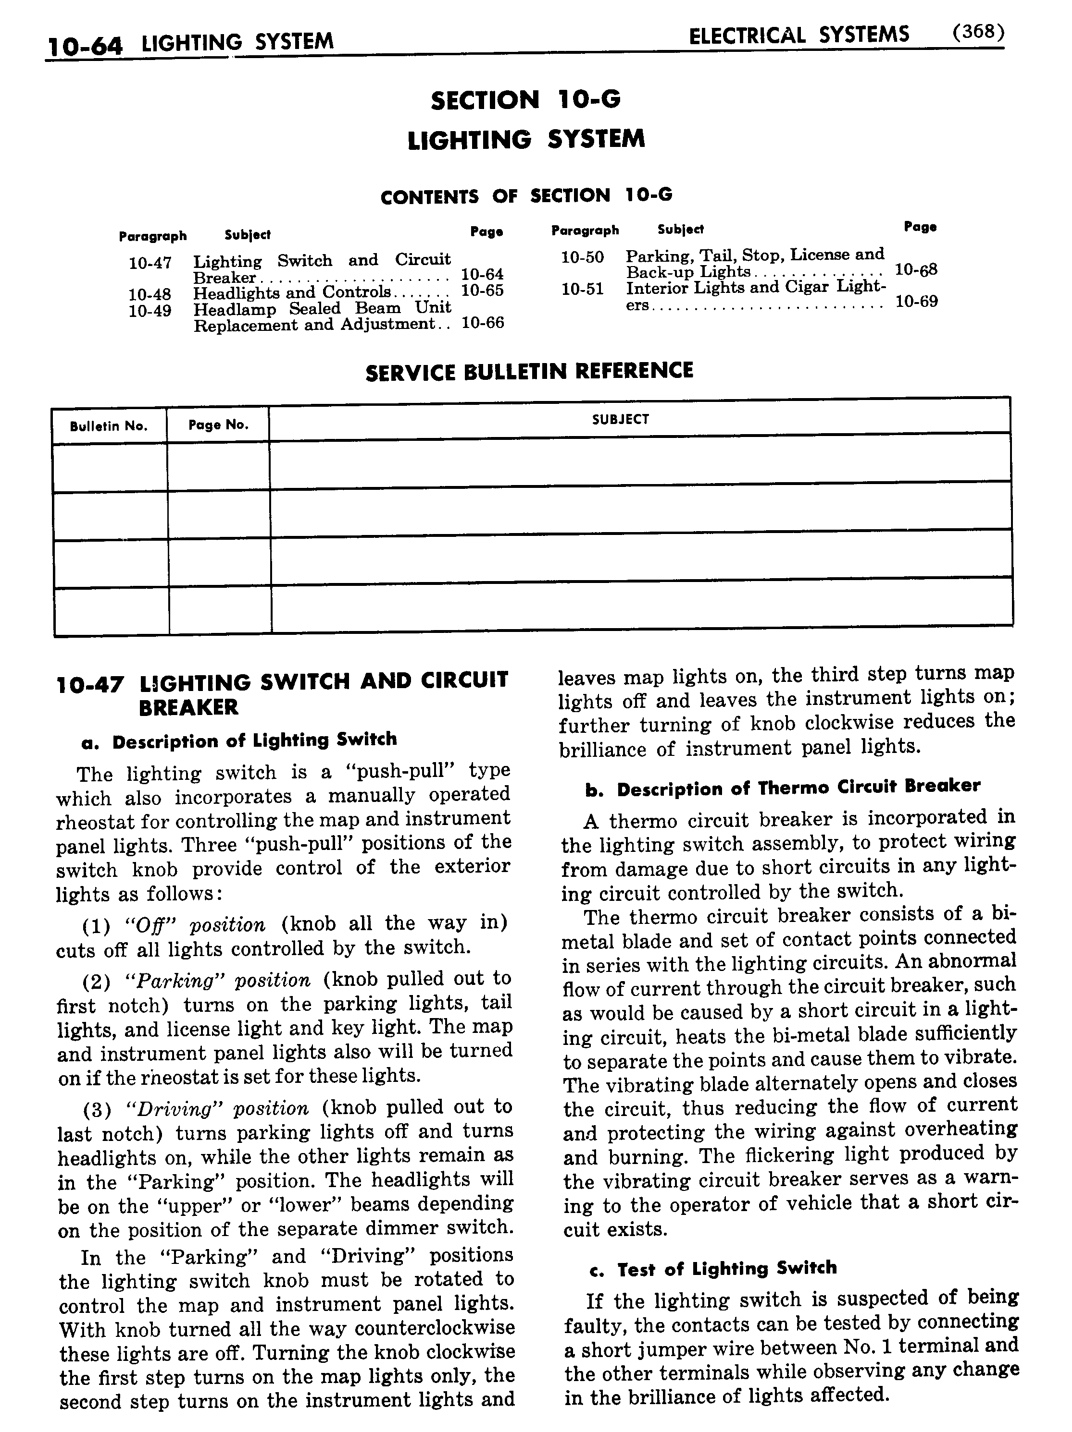 n_11 1955 Buick Shop Manual - Electrical Systems-064-064.jpg